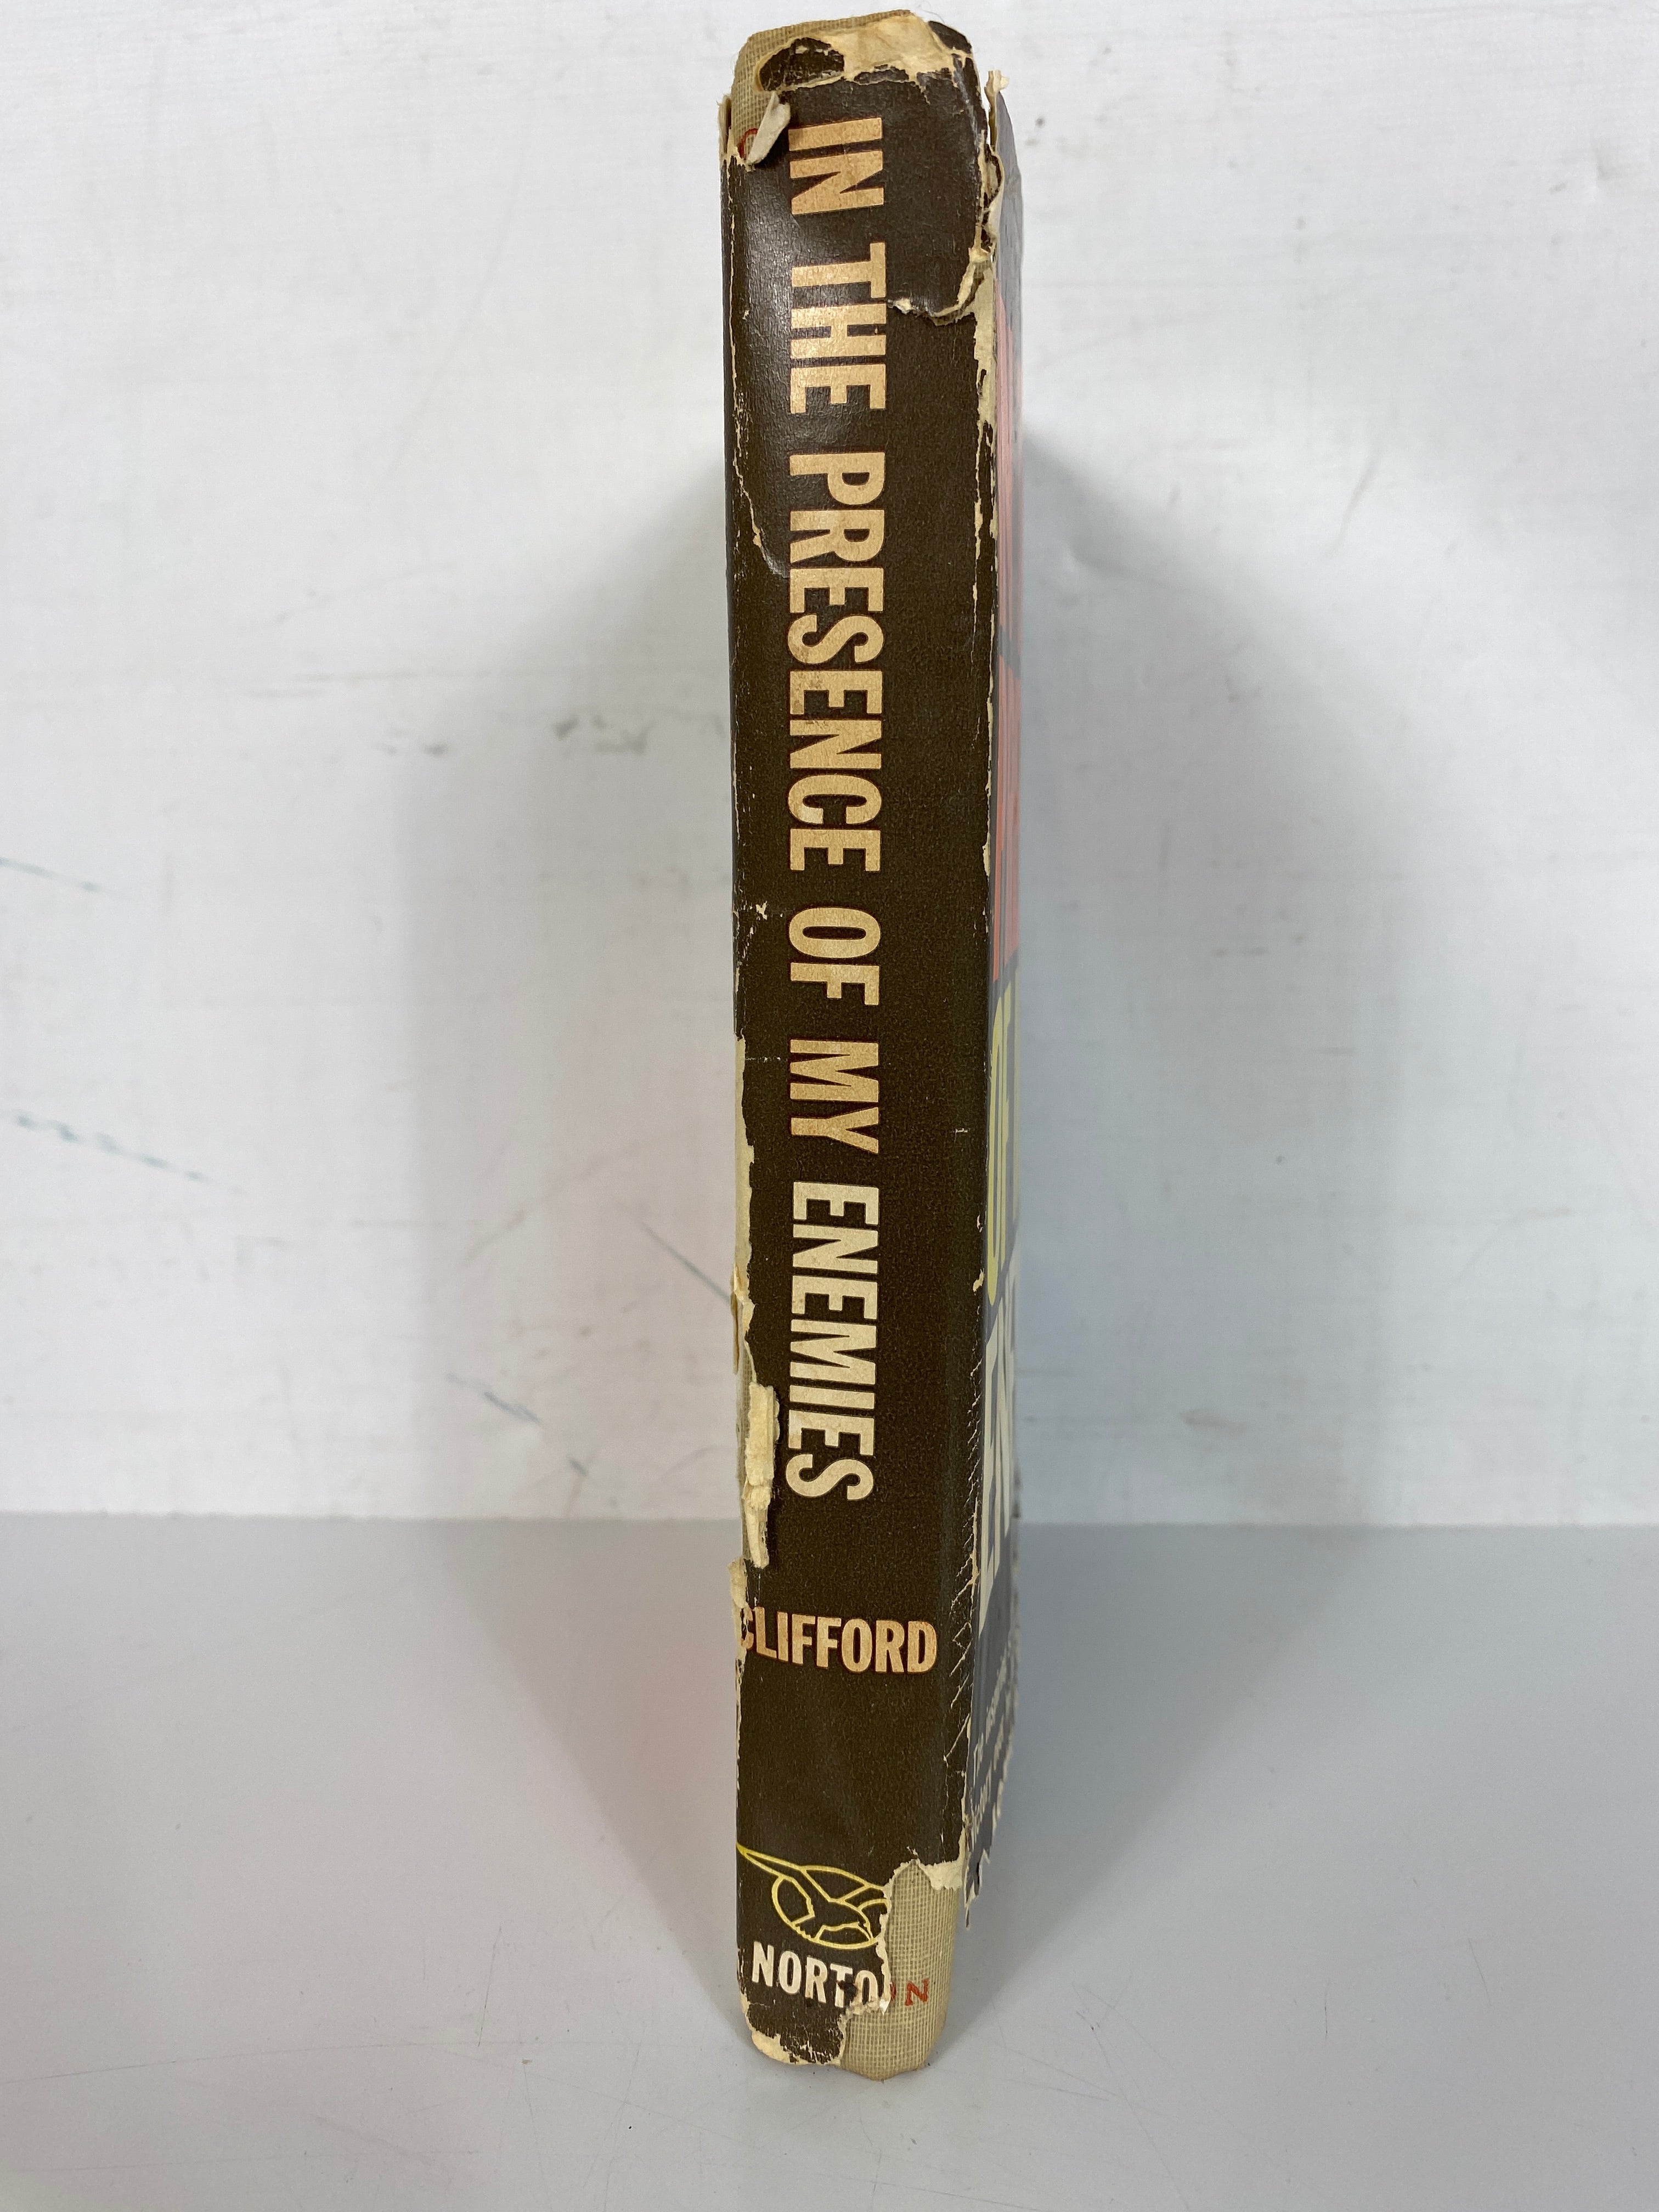 In The Presence of My Enemies by John W. Clifford 1963 First Edition HC DJ